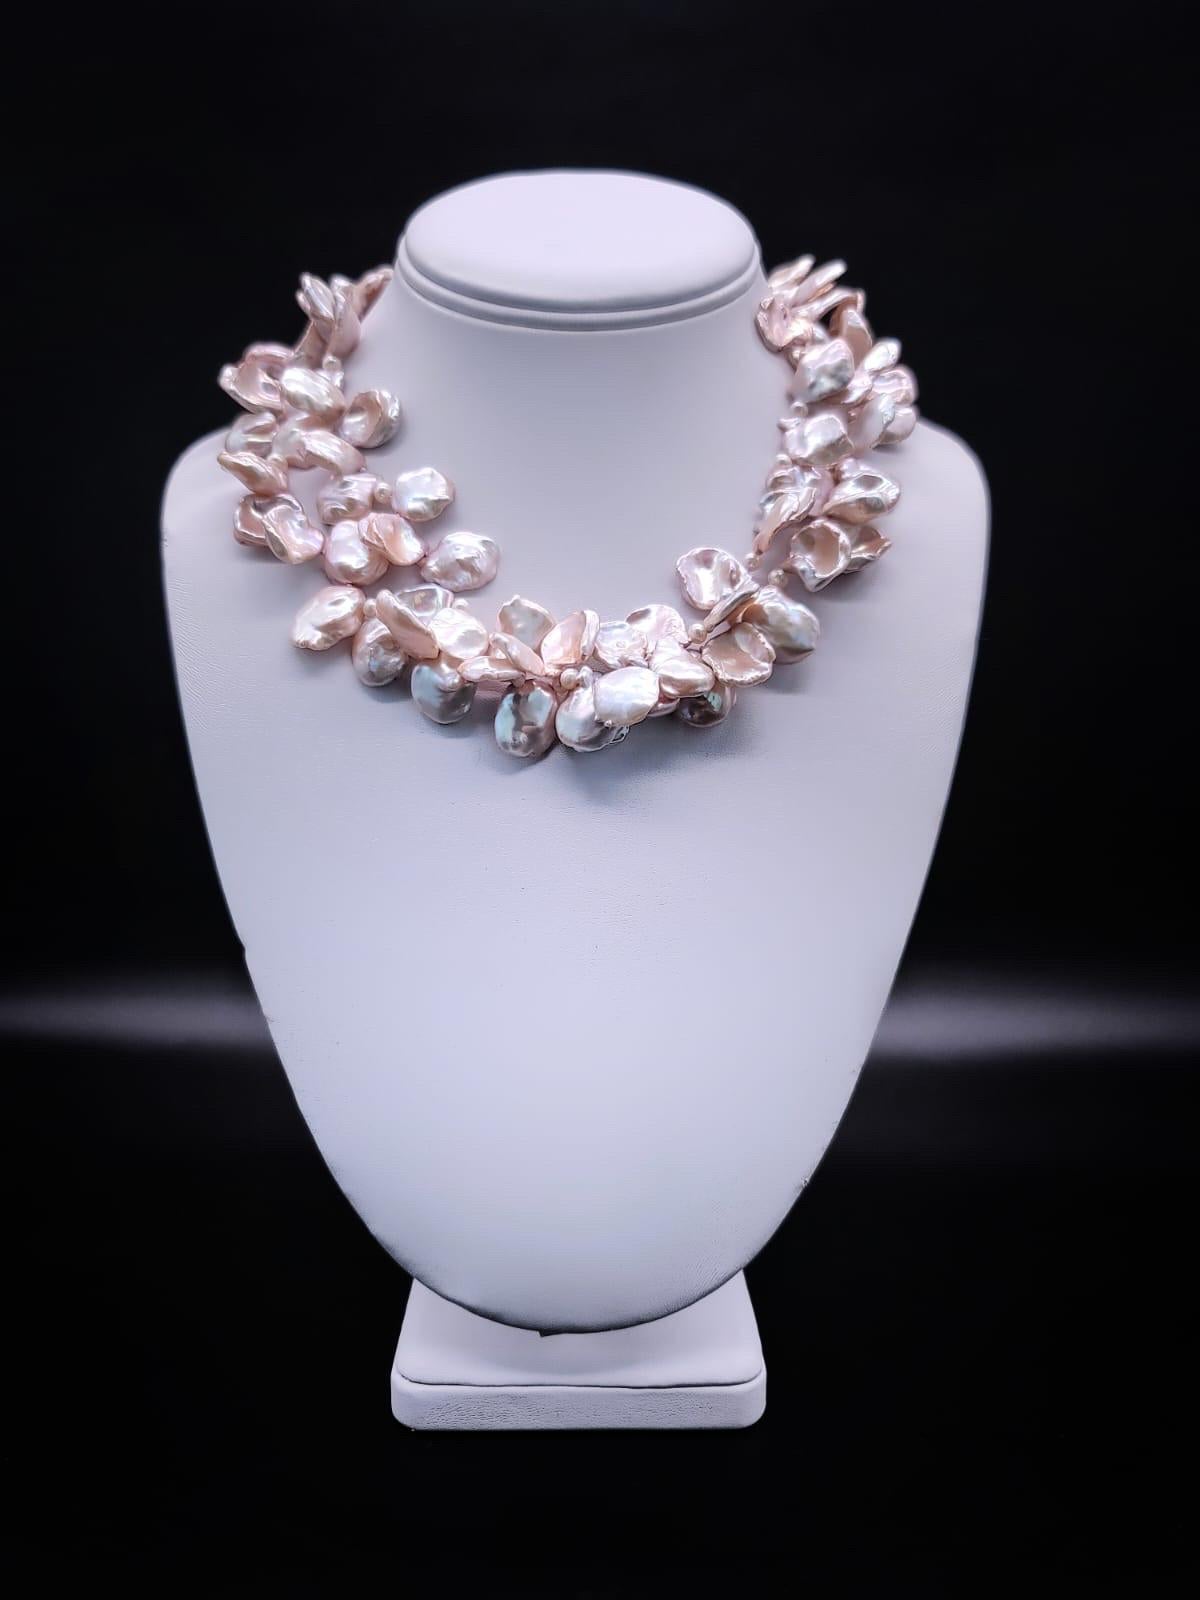 One-of-a-Kind

This freshwater keshi pearl 2 strand necklace with a vintage carved Italian cameo featuring flowers is a stunning and unique piece of jewelry that exudes timeless elegance. The necklace features two strands of delicate and lustrous